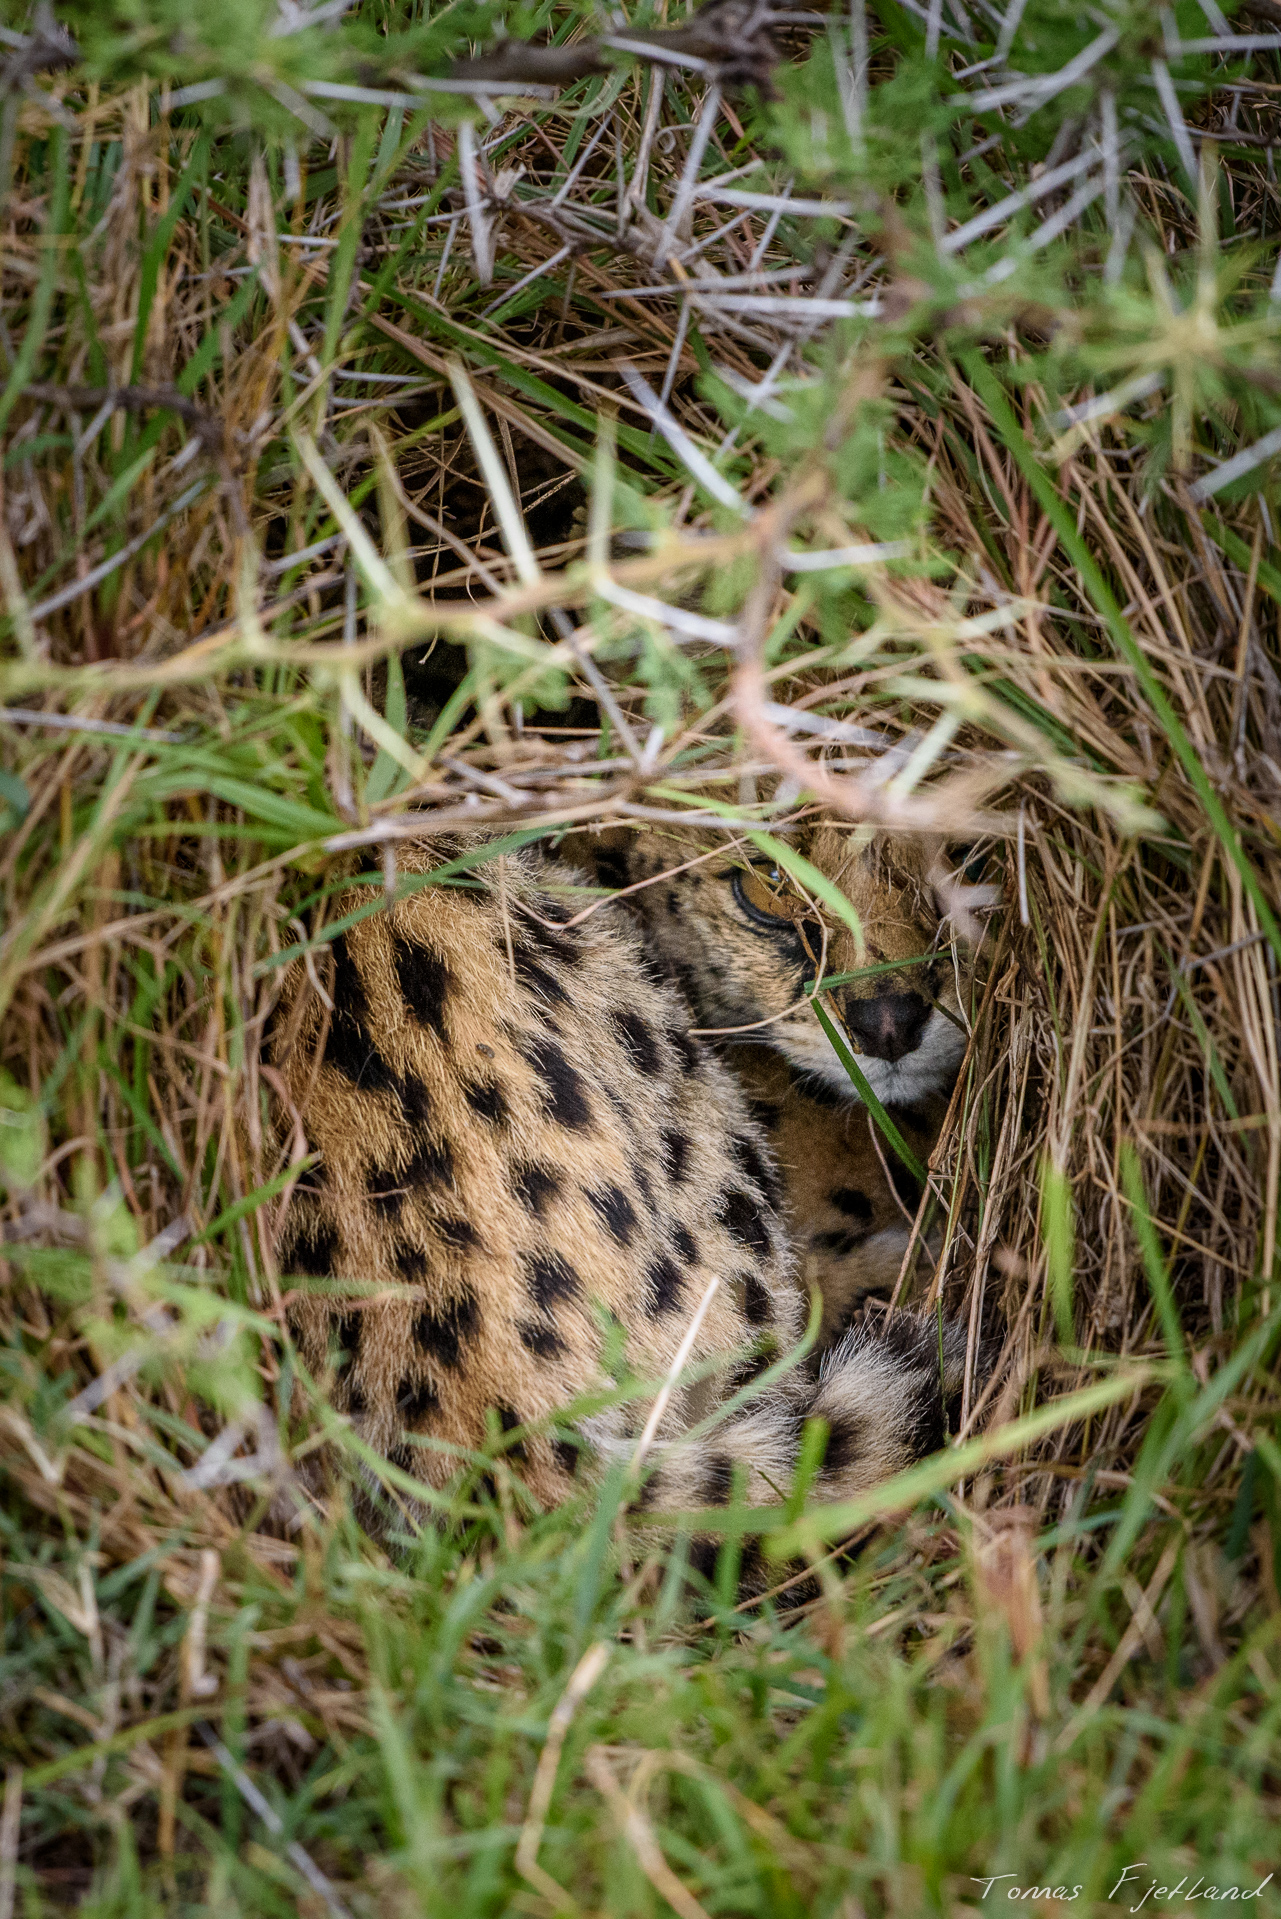 This is the closest I've gotten to a shot of the seclusive Serval so far...